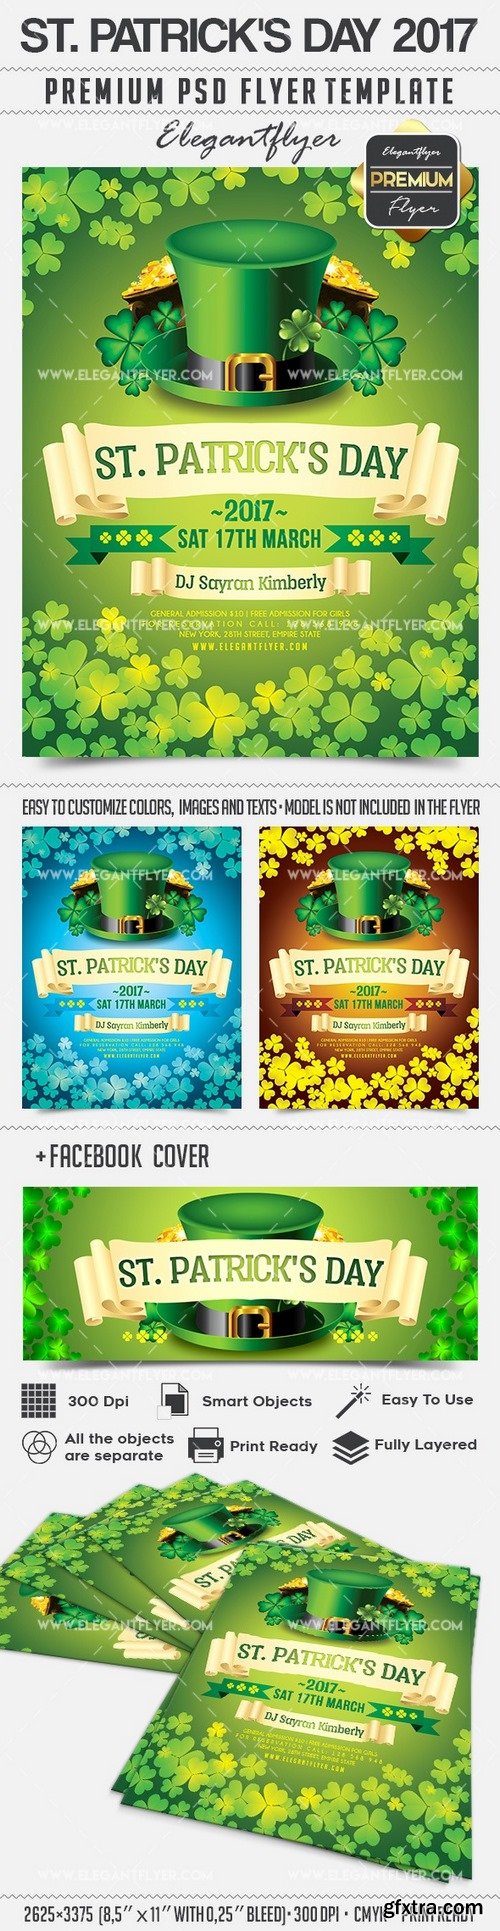 St. Patrick’s Day 2017 – Flyer PSD Template + Facebook Cover